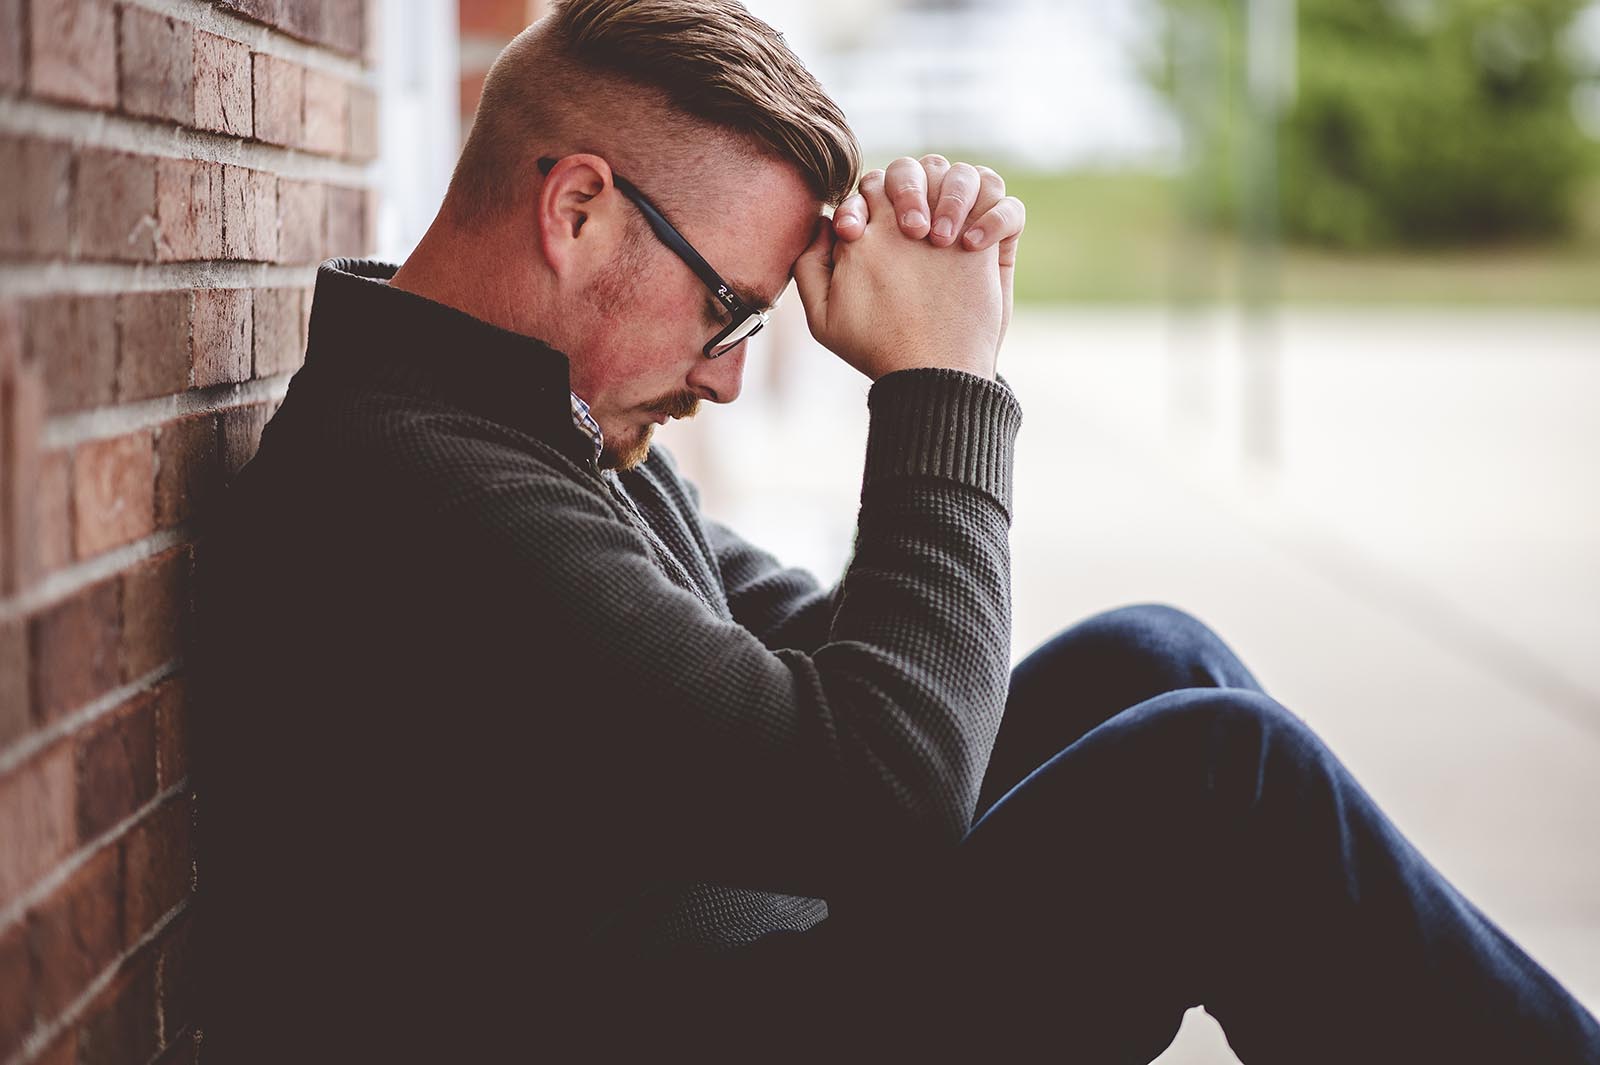 10 Questions to Consider if You’re a Pastor Thinking about Leaving Your Church